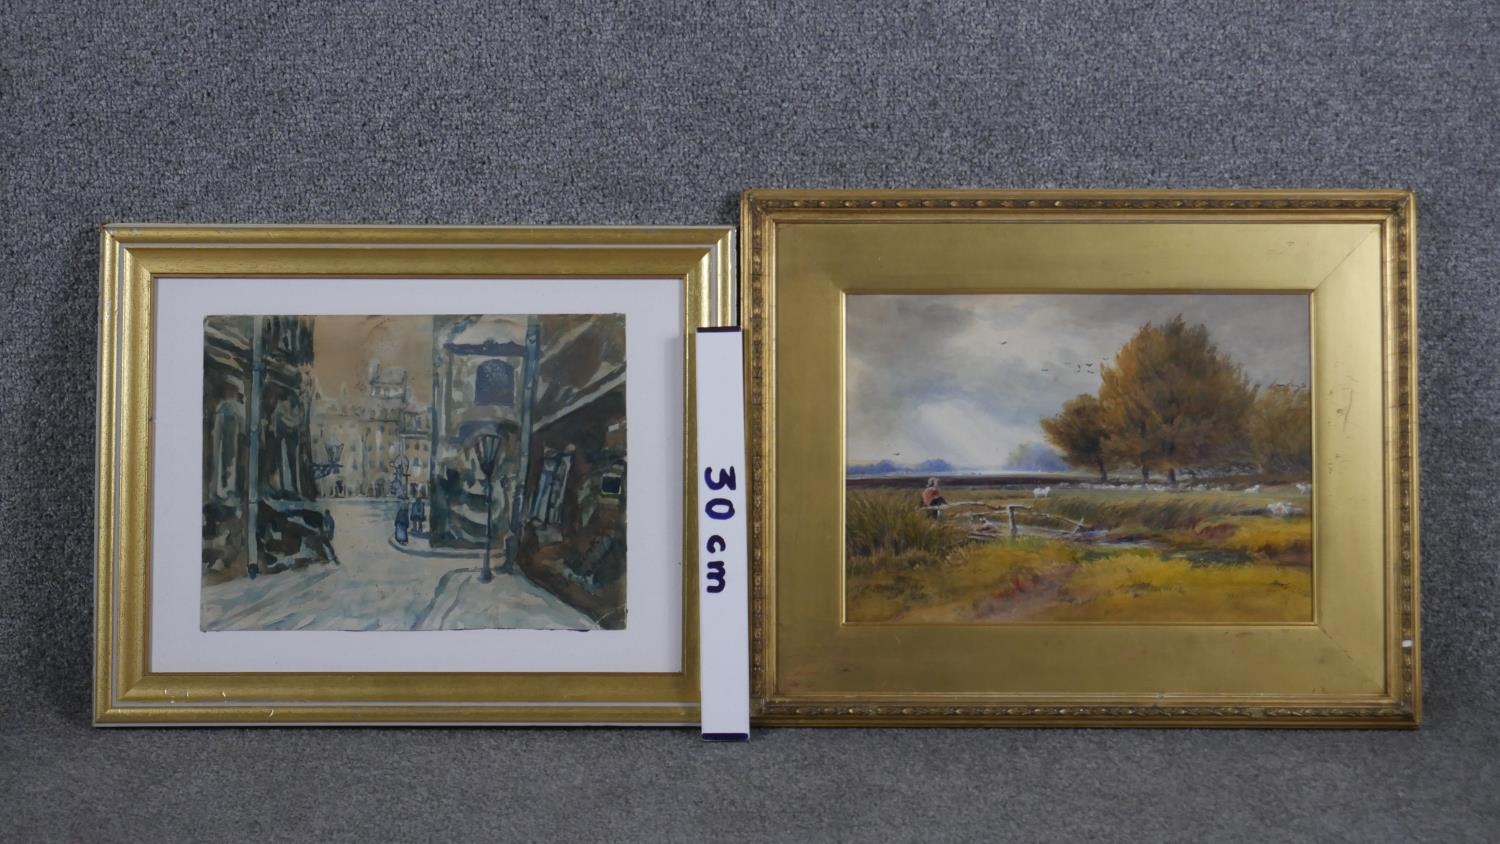 A framed and glazed watercolour, Impressionist street scene along with a 19th century watercolour, - Image 8 of 8